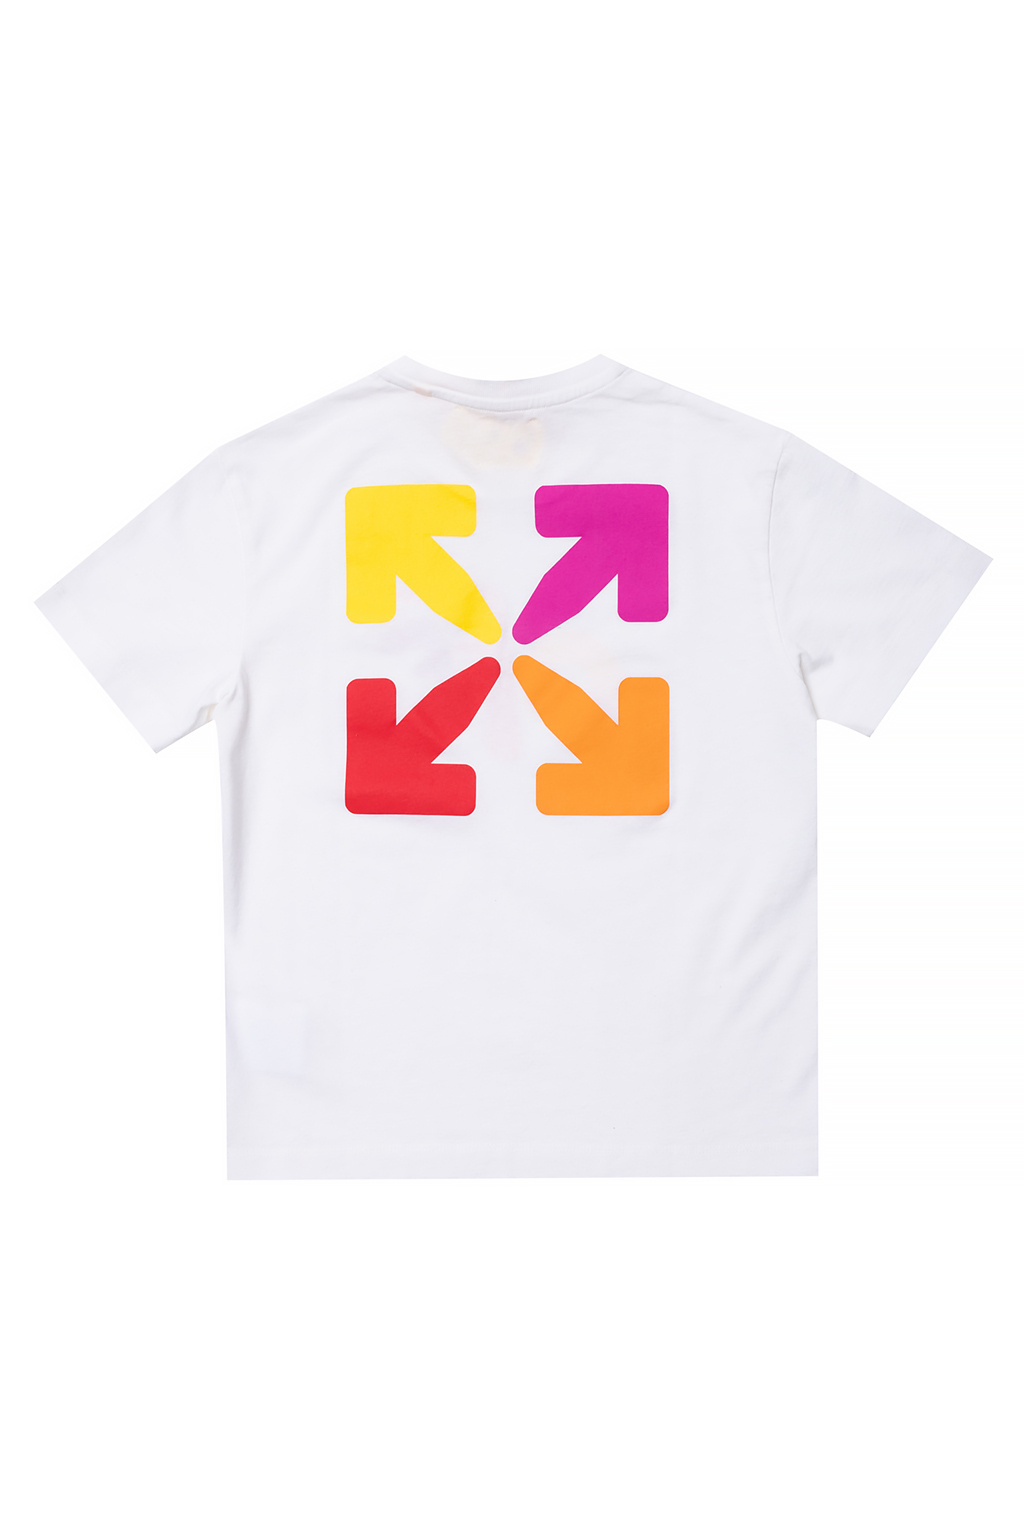  A4 Sportswear Youth Small Cardinal/White Cooling Tee :  Clothing, Shoes & Jewelry